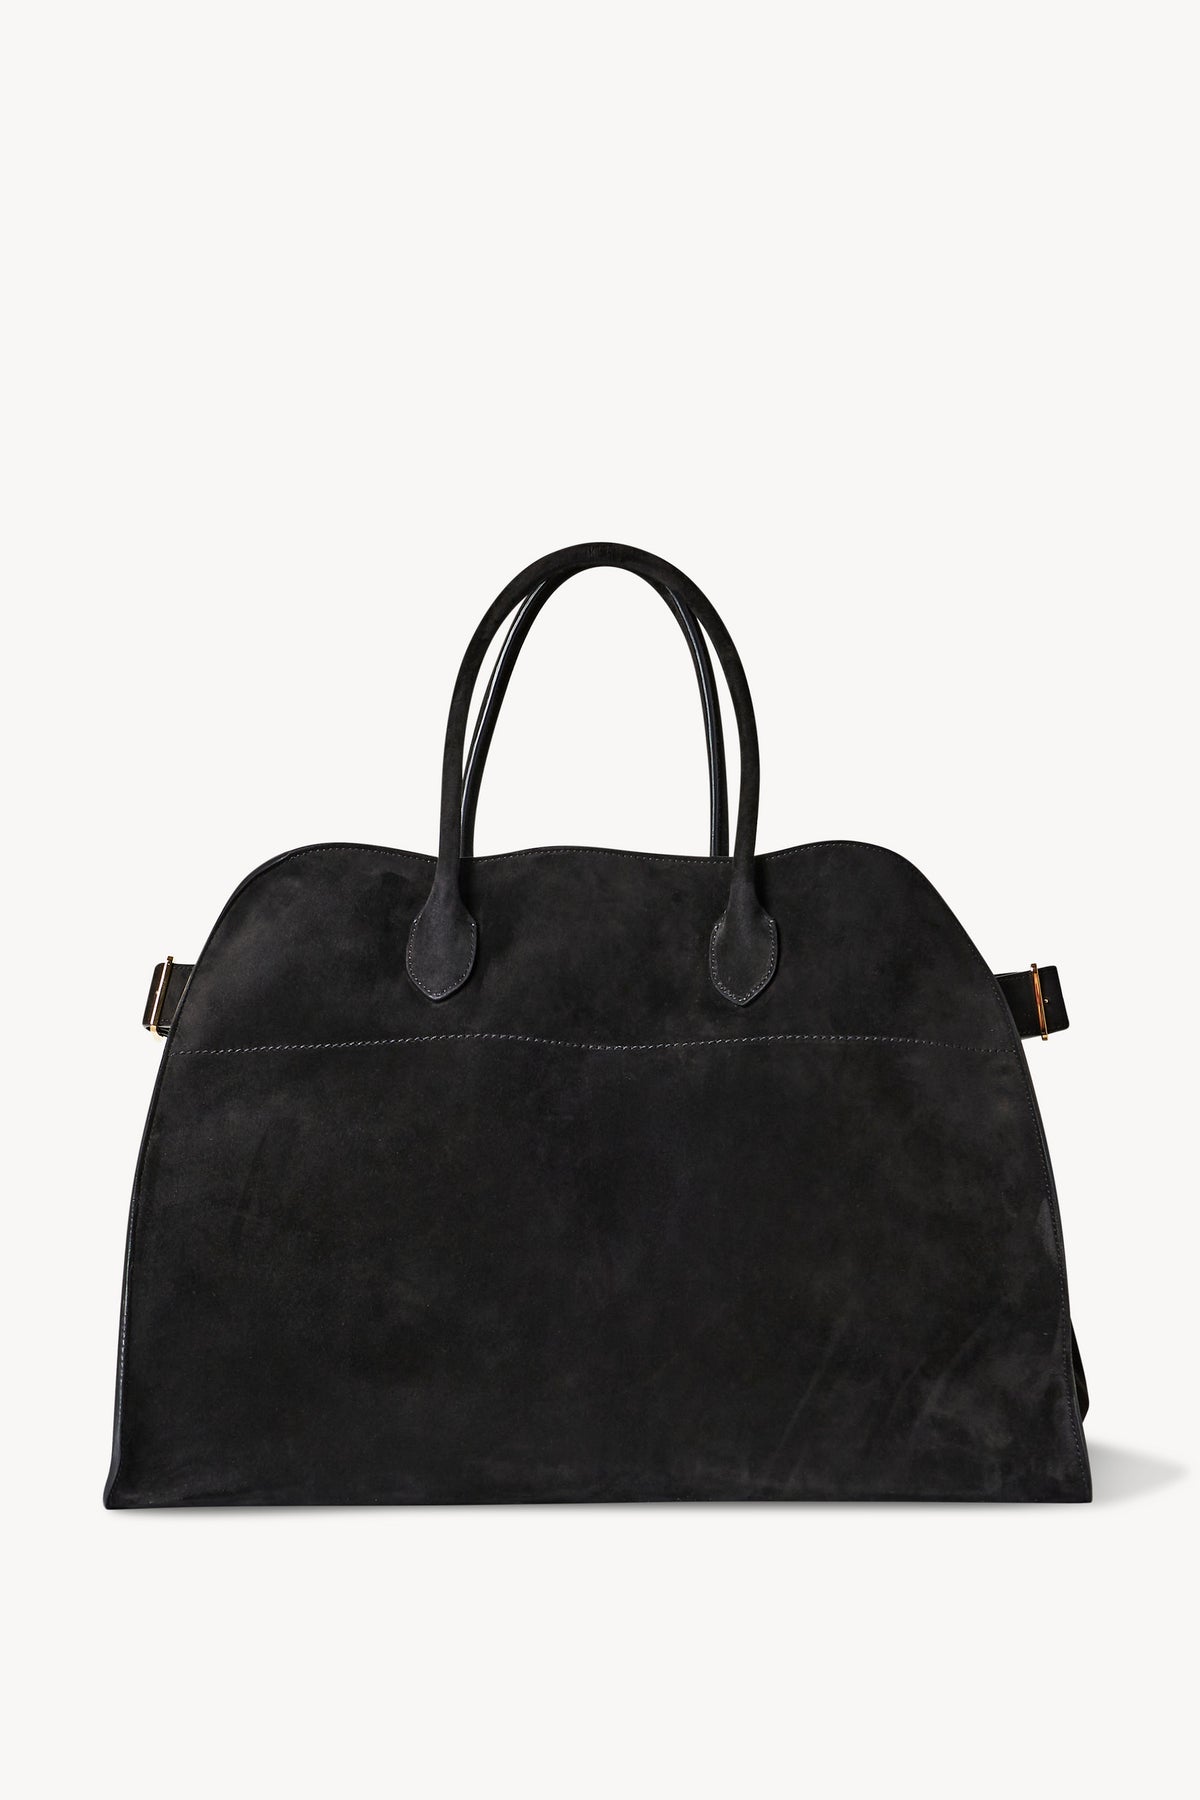 The Row Margaux 17 Buckled Leather Tote, Designer Bags